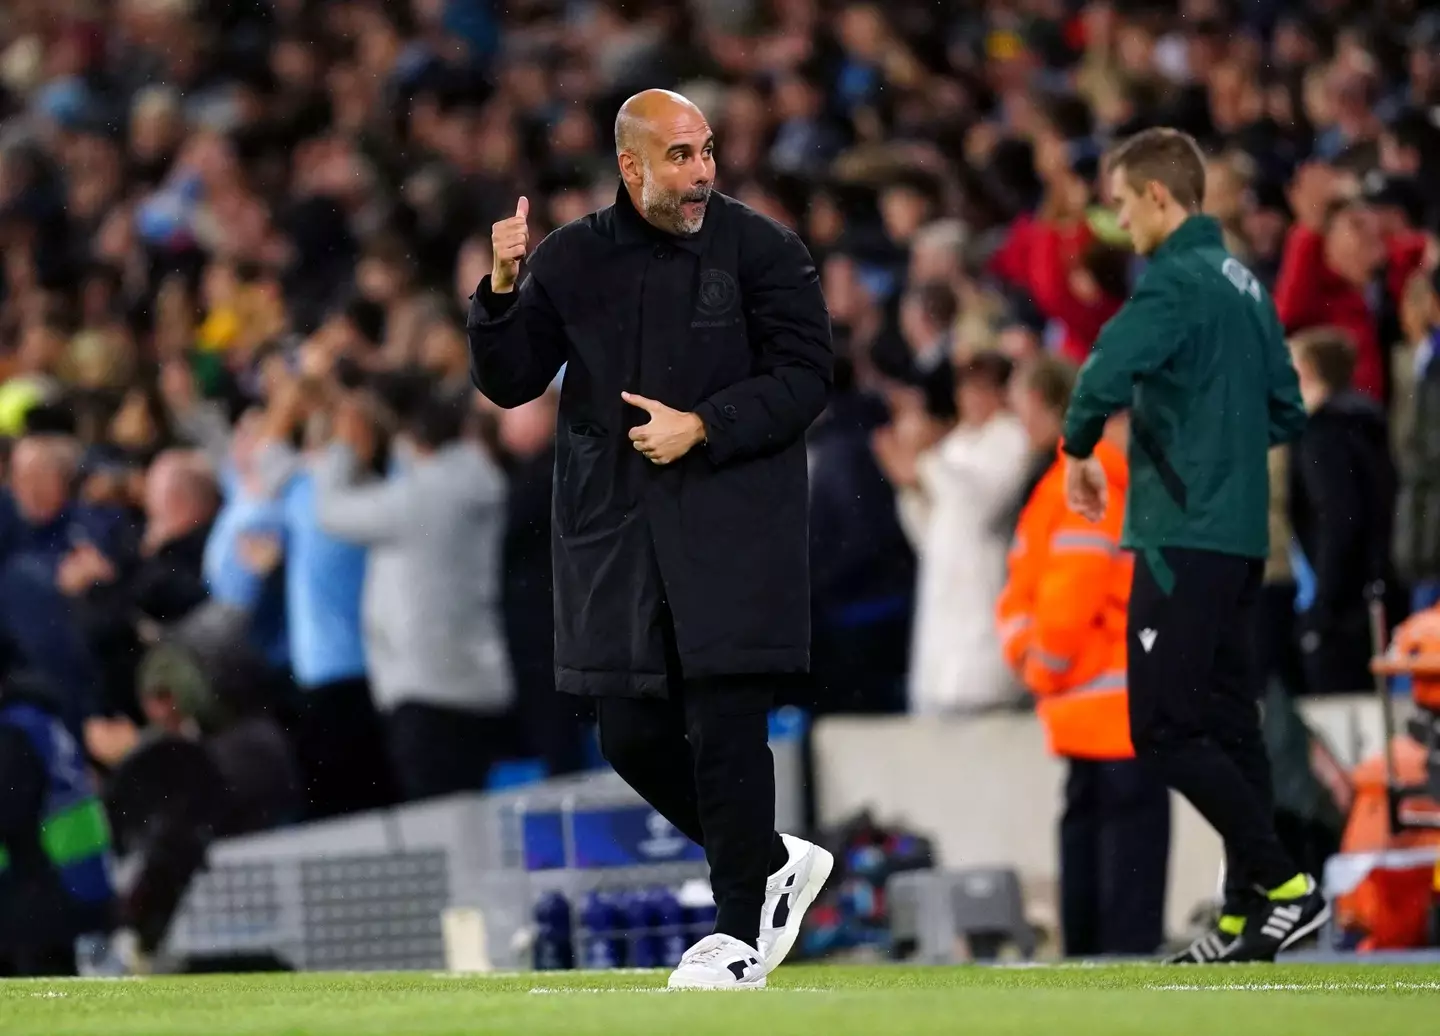 Manchester City manager Pep Guardiola on the touchline.